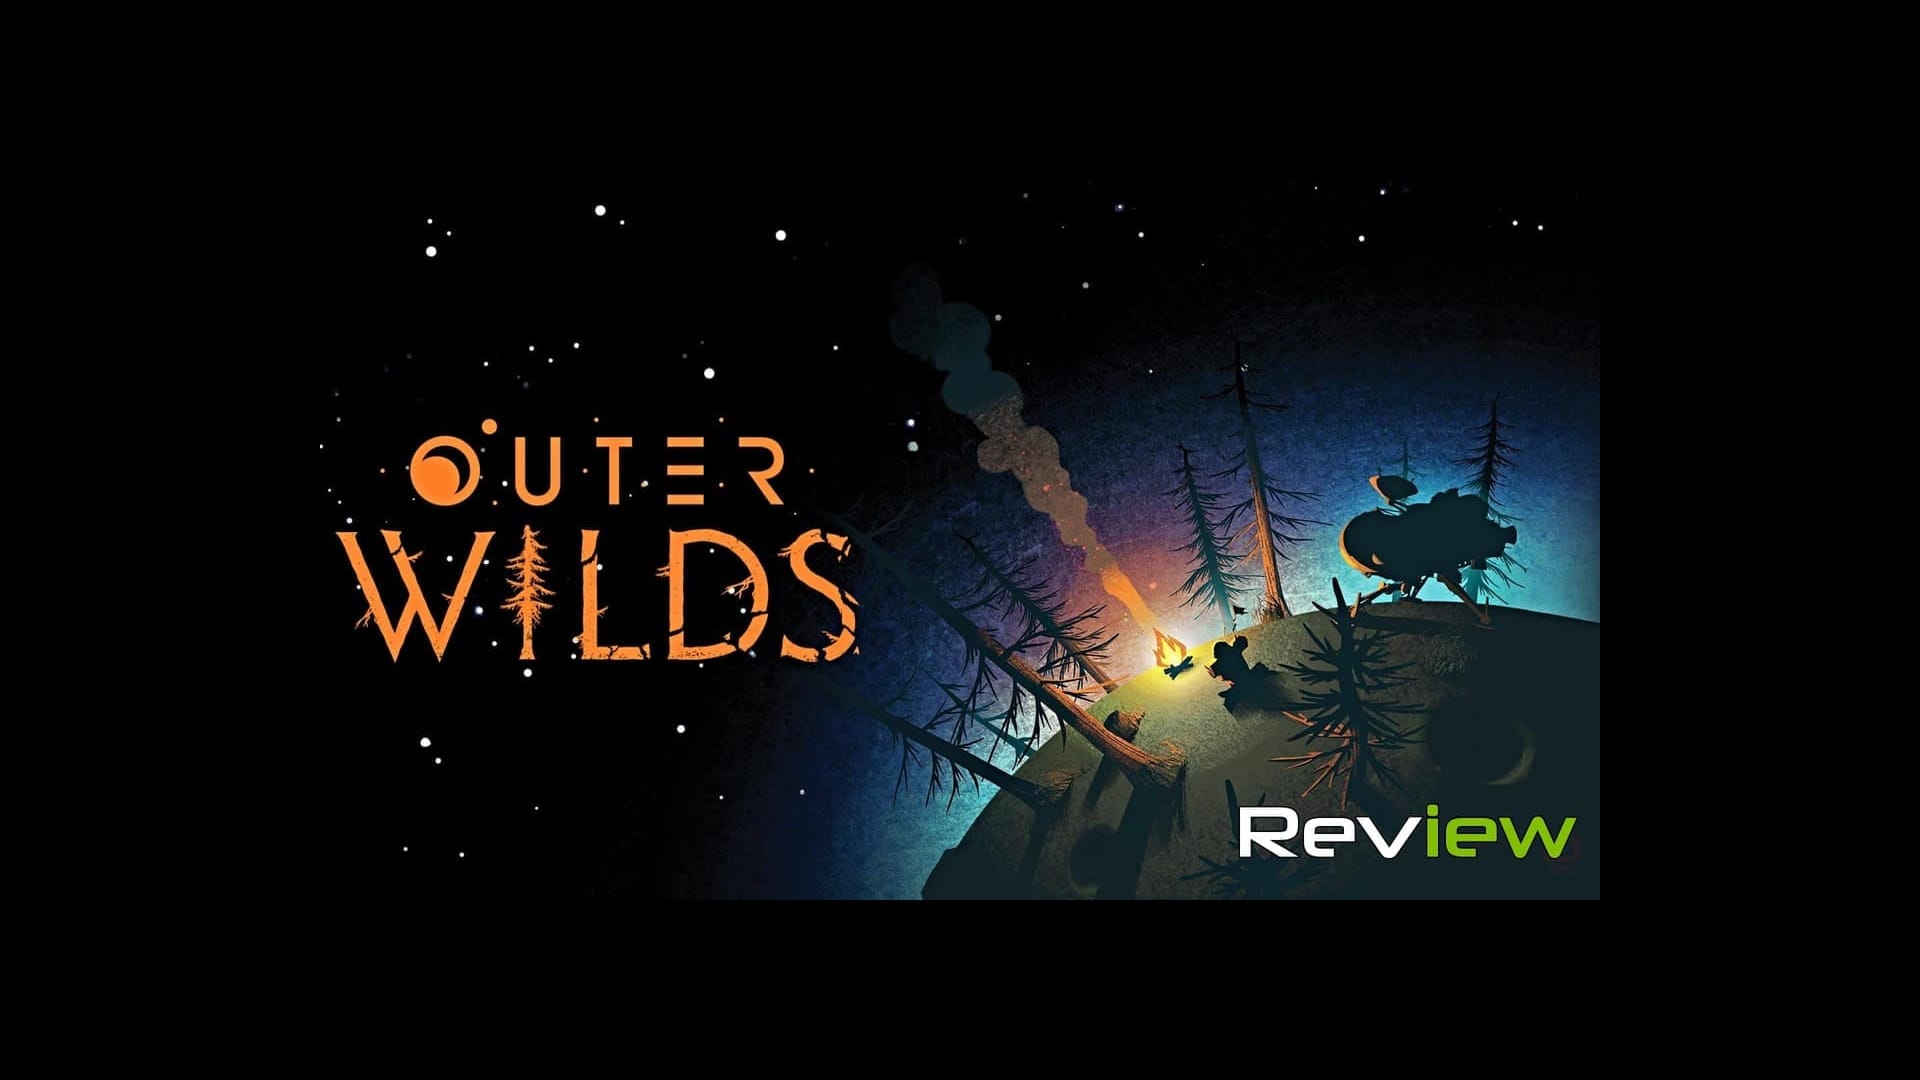 A Universe of Wonder: Why 'Outer Wilds' is One of the Best Games